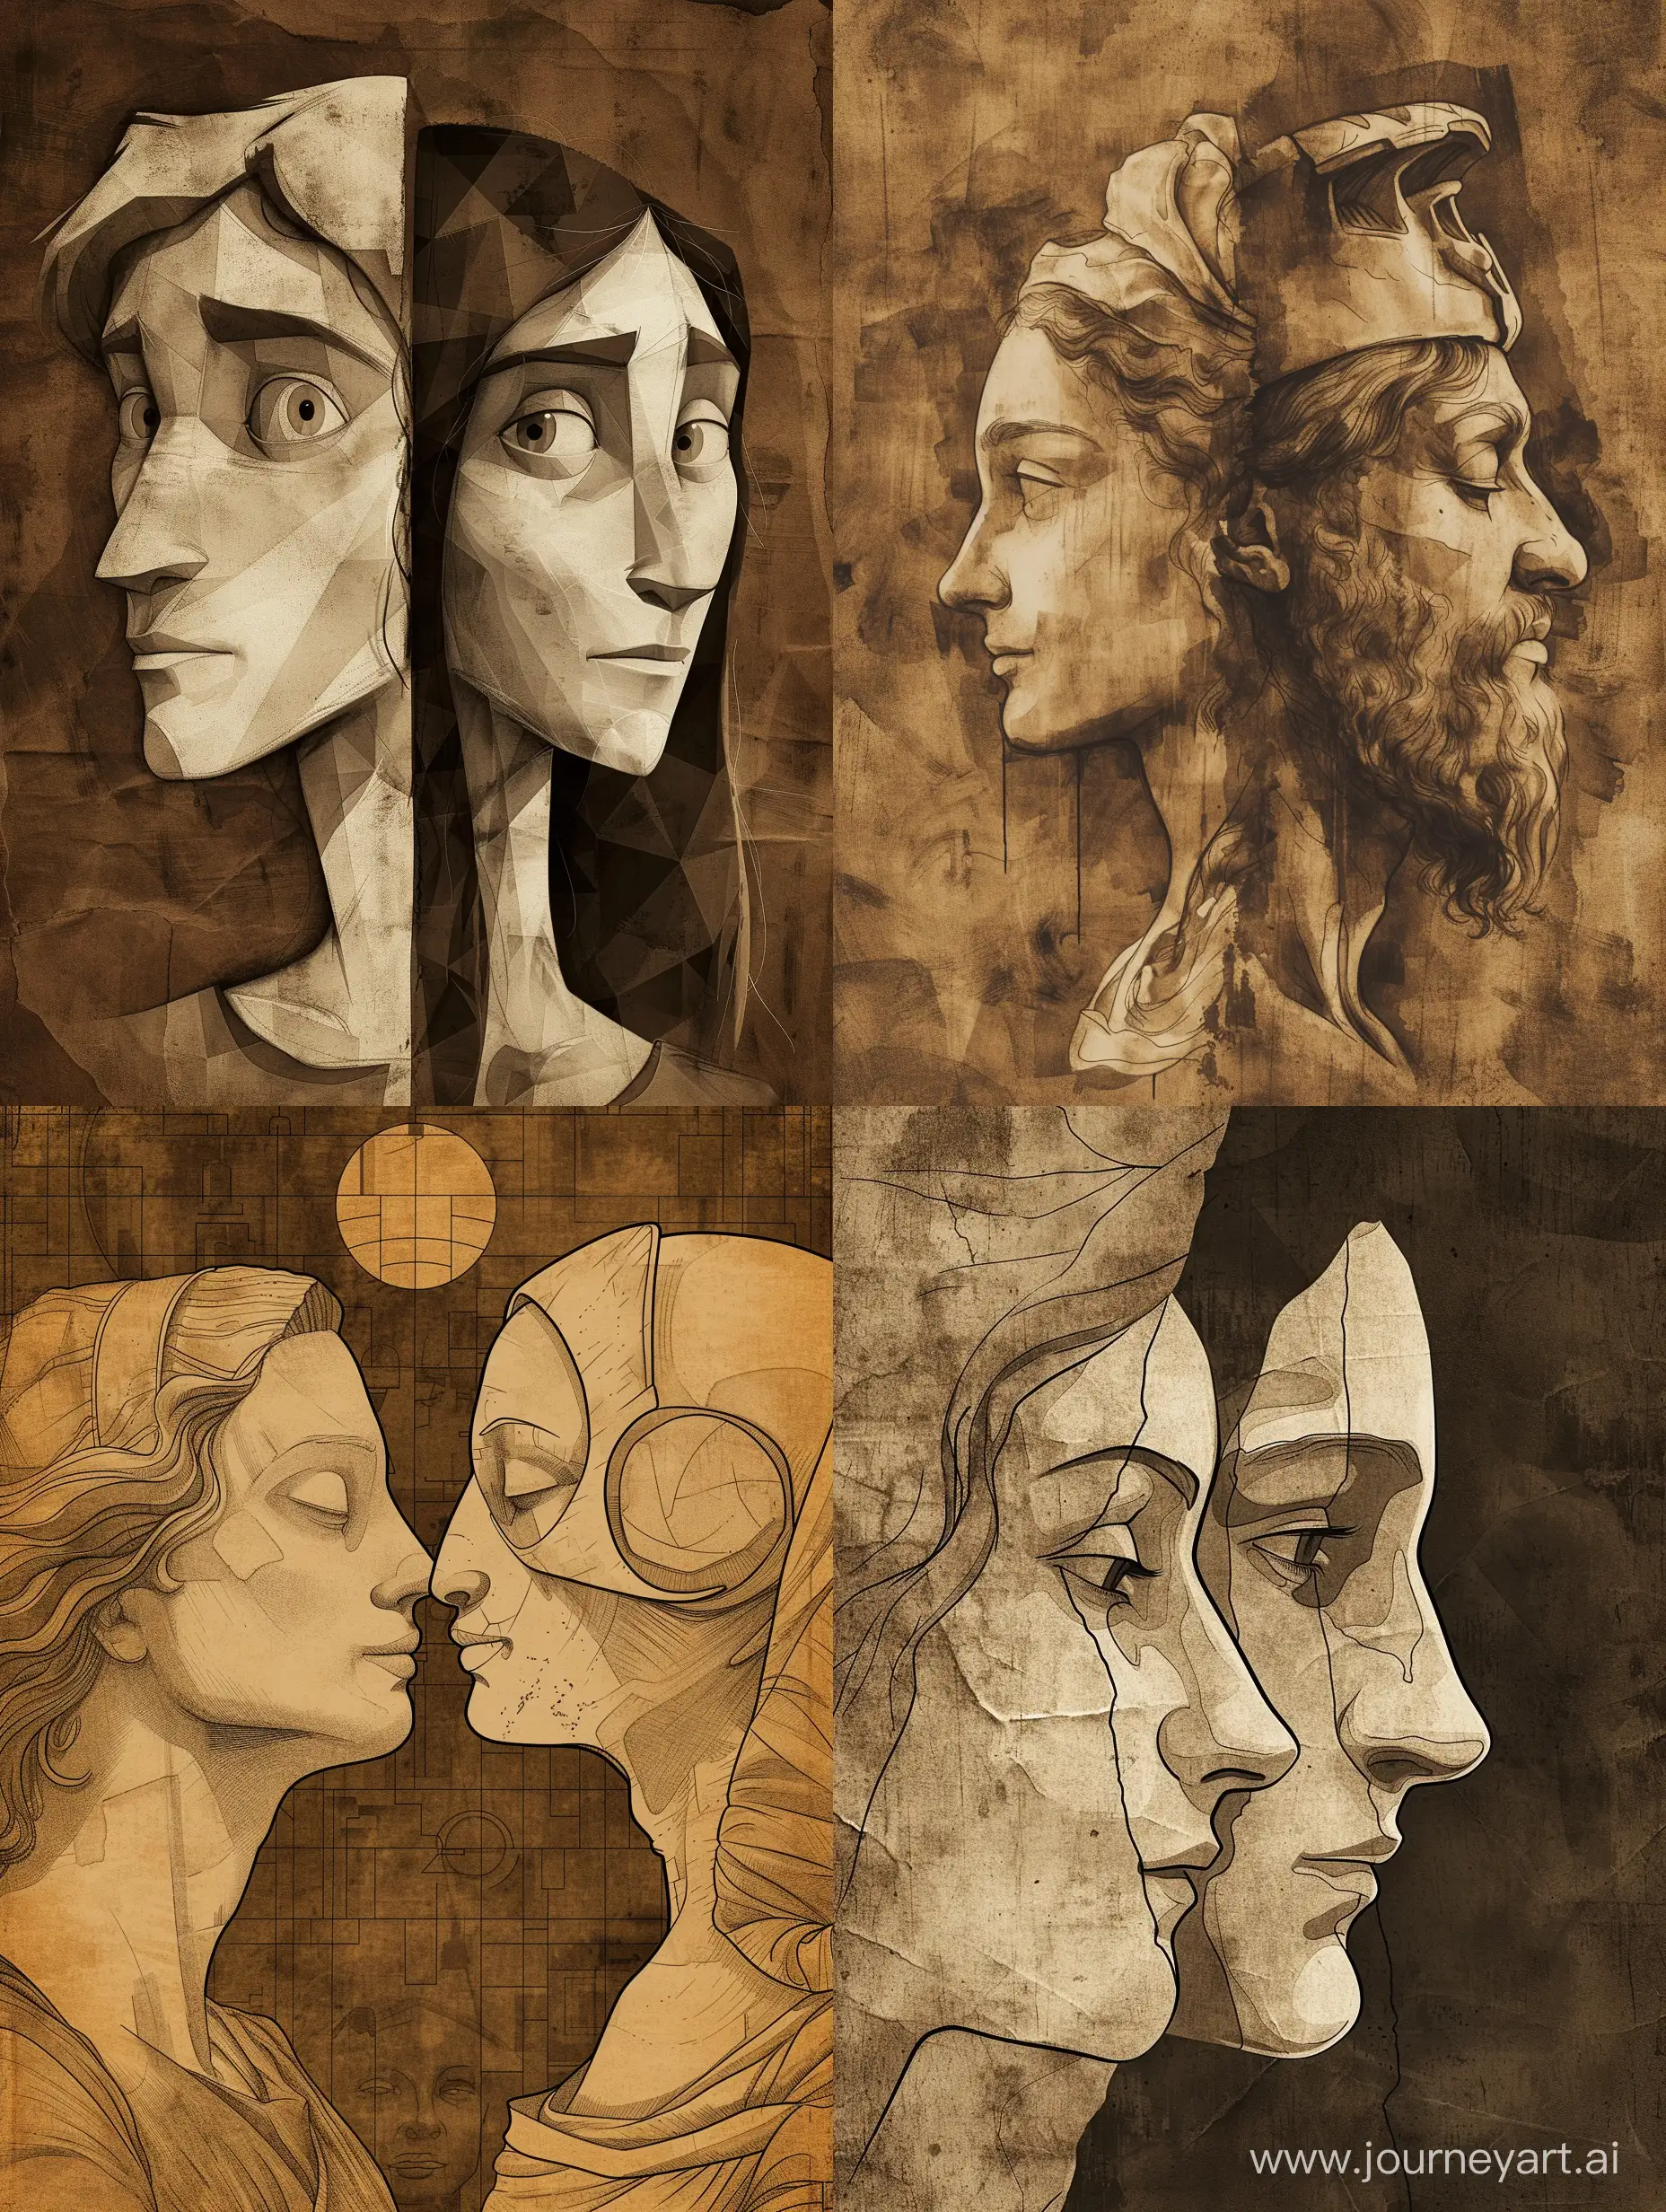 Funny minimalism Cartoon caricature Portrait, long face young man and woman in the style of Keith Negley , the epic art portrait vibes against a deep, graffiti, illustration, 3d render Close-up image , pen and ink drawing sepia ink of statue , by Leonardo da Vinci.Art by Quentin Blake, Alberto Vargas, Zdzislaw Beksinski, architecture, painting, dark fantasy, illustration